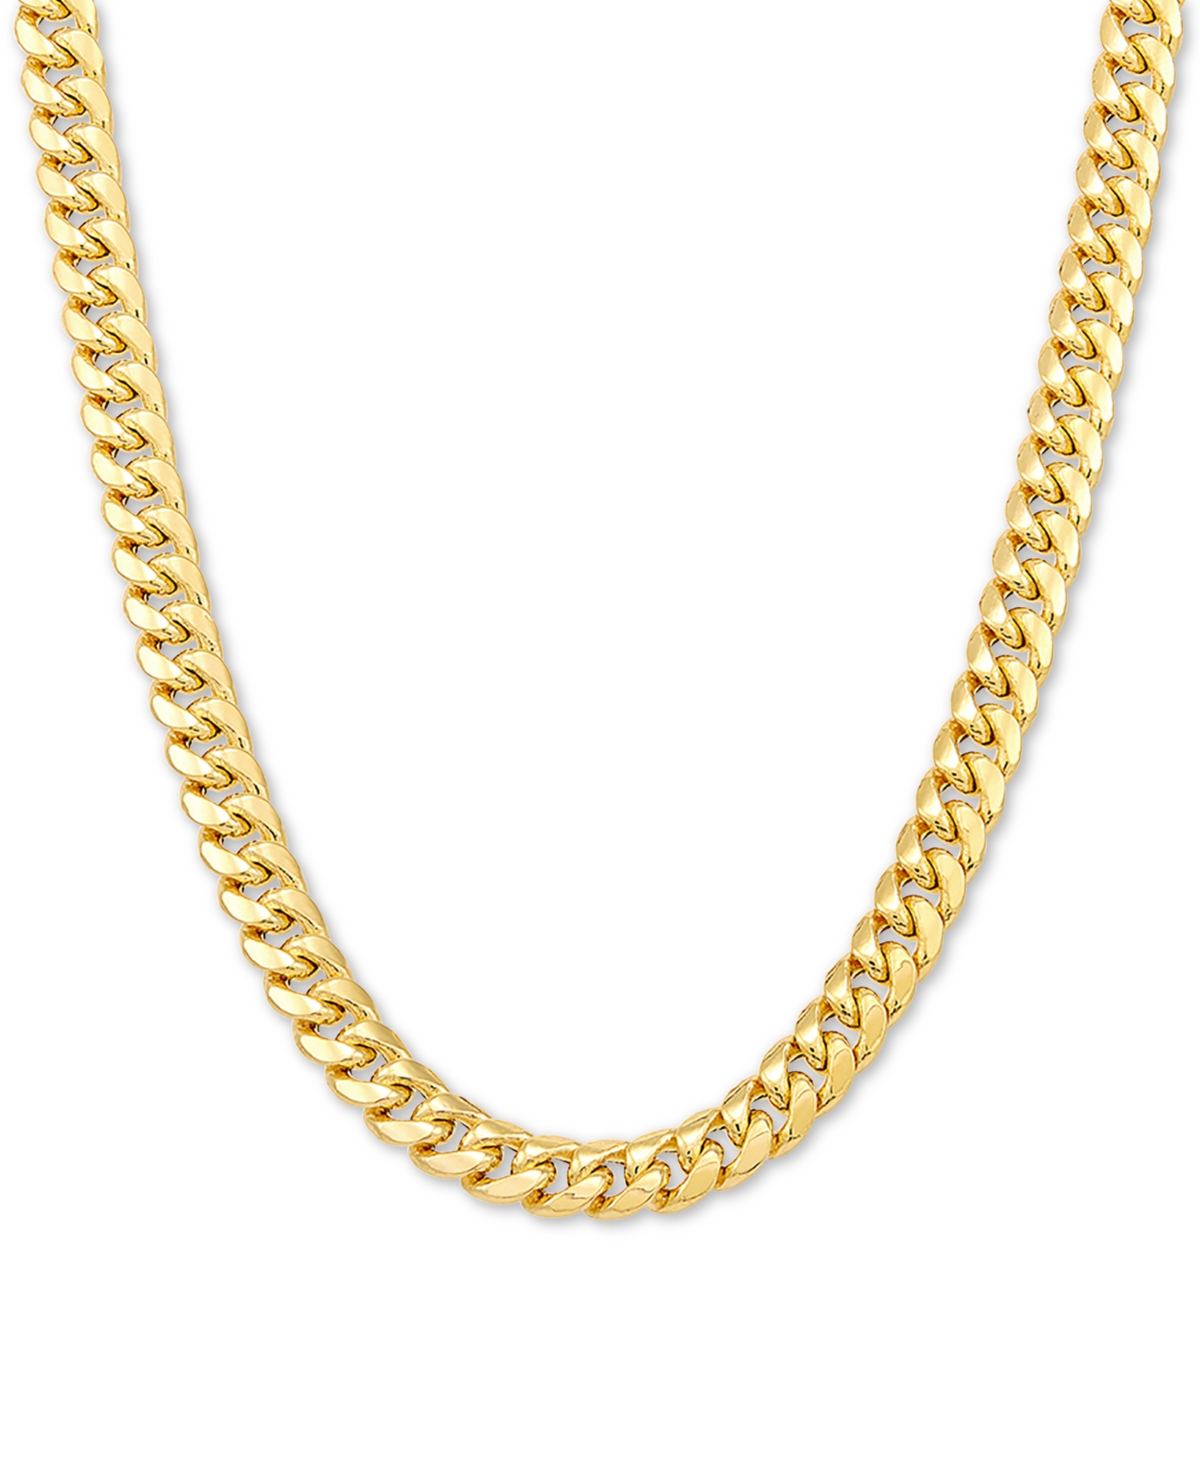 Miami Cuban Link 20" Chain Necklace (6mm) in 10k Gold - Yellow Gold